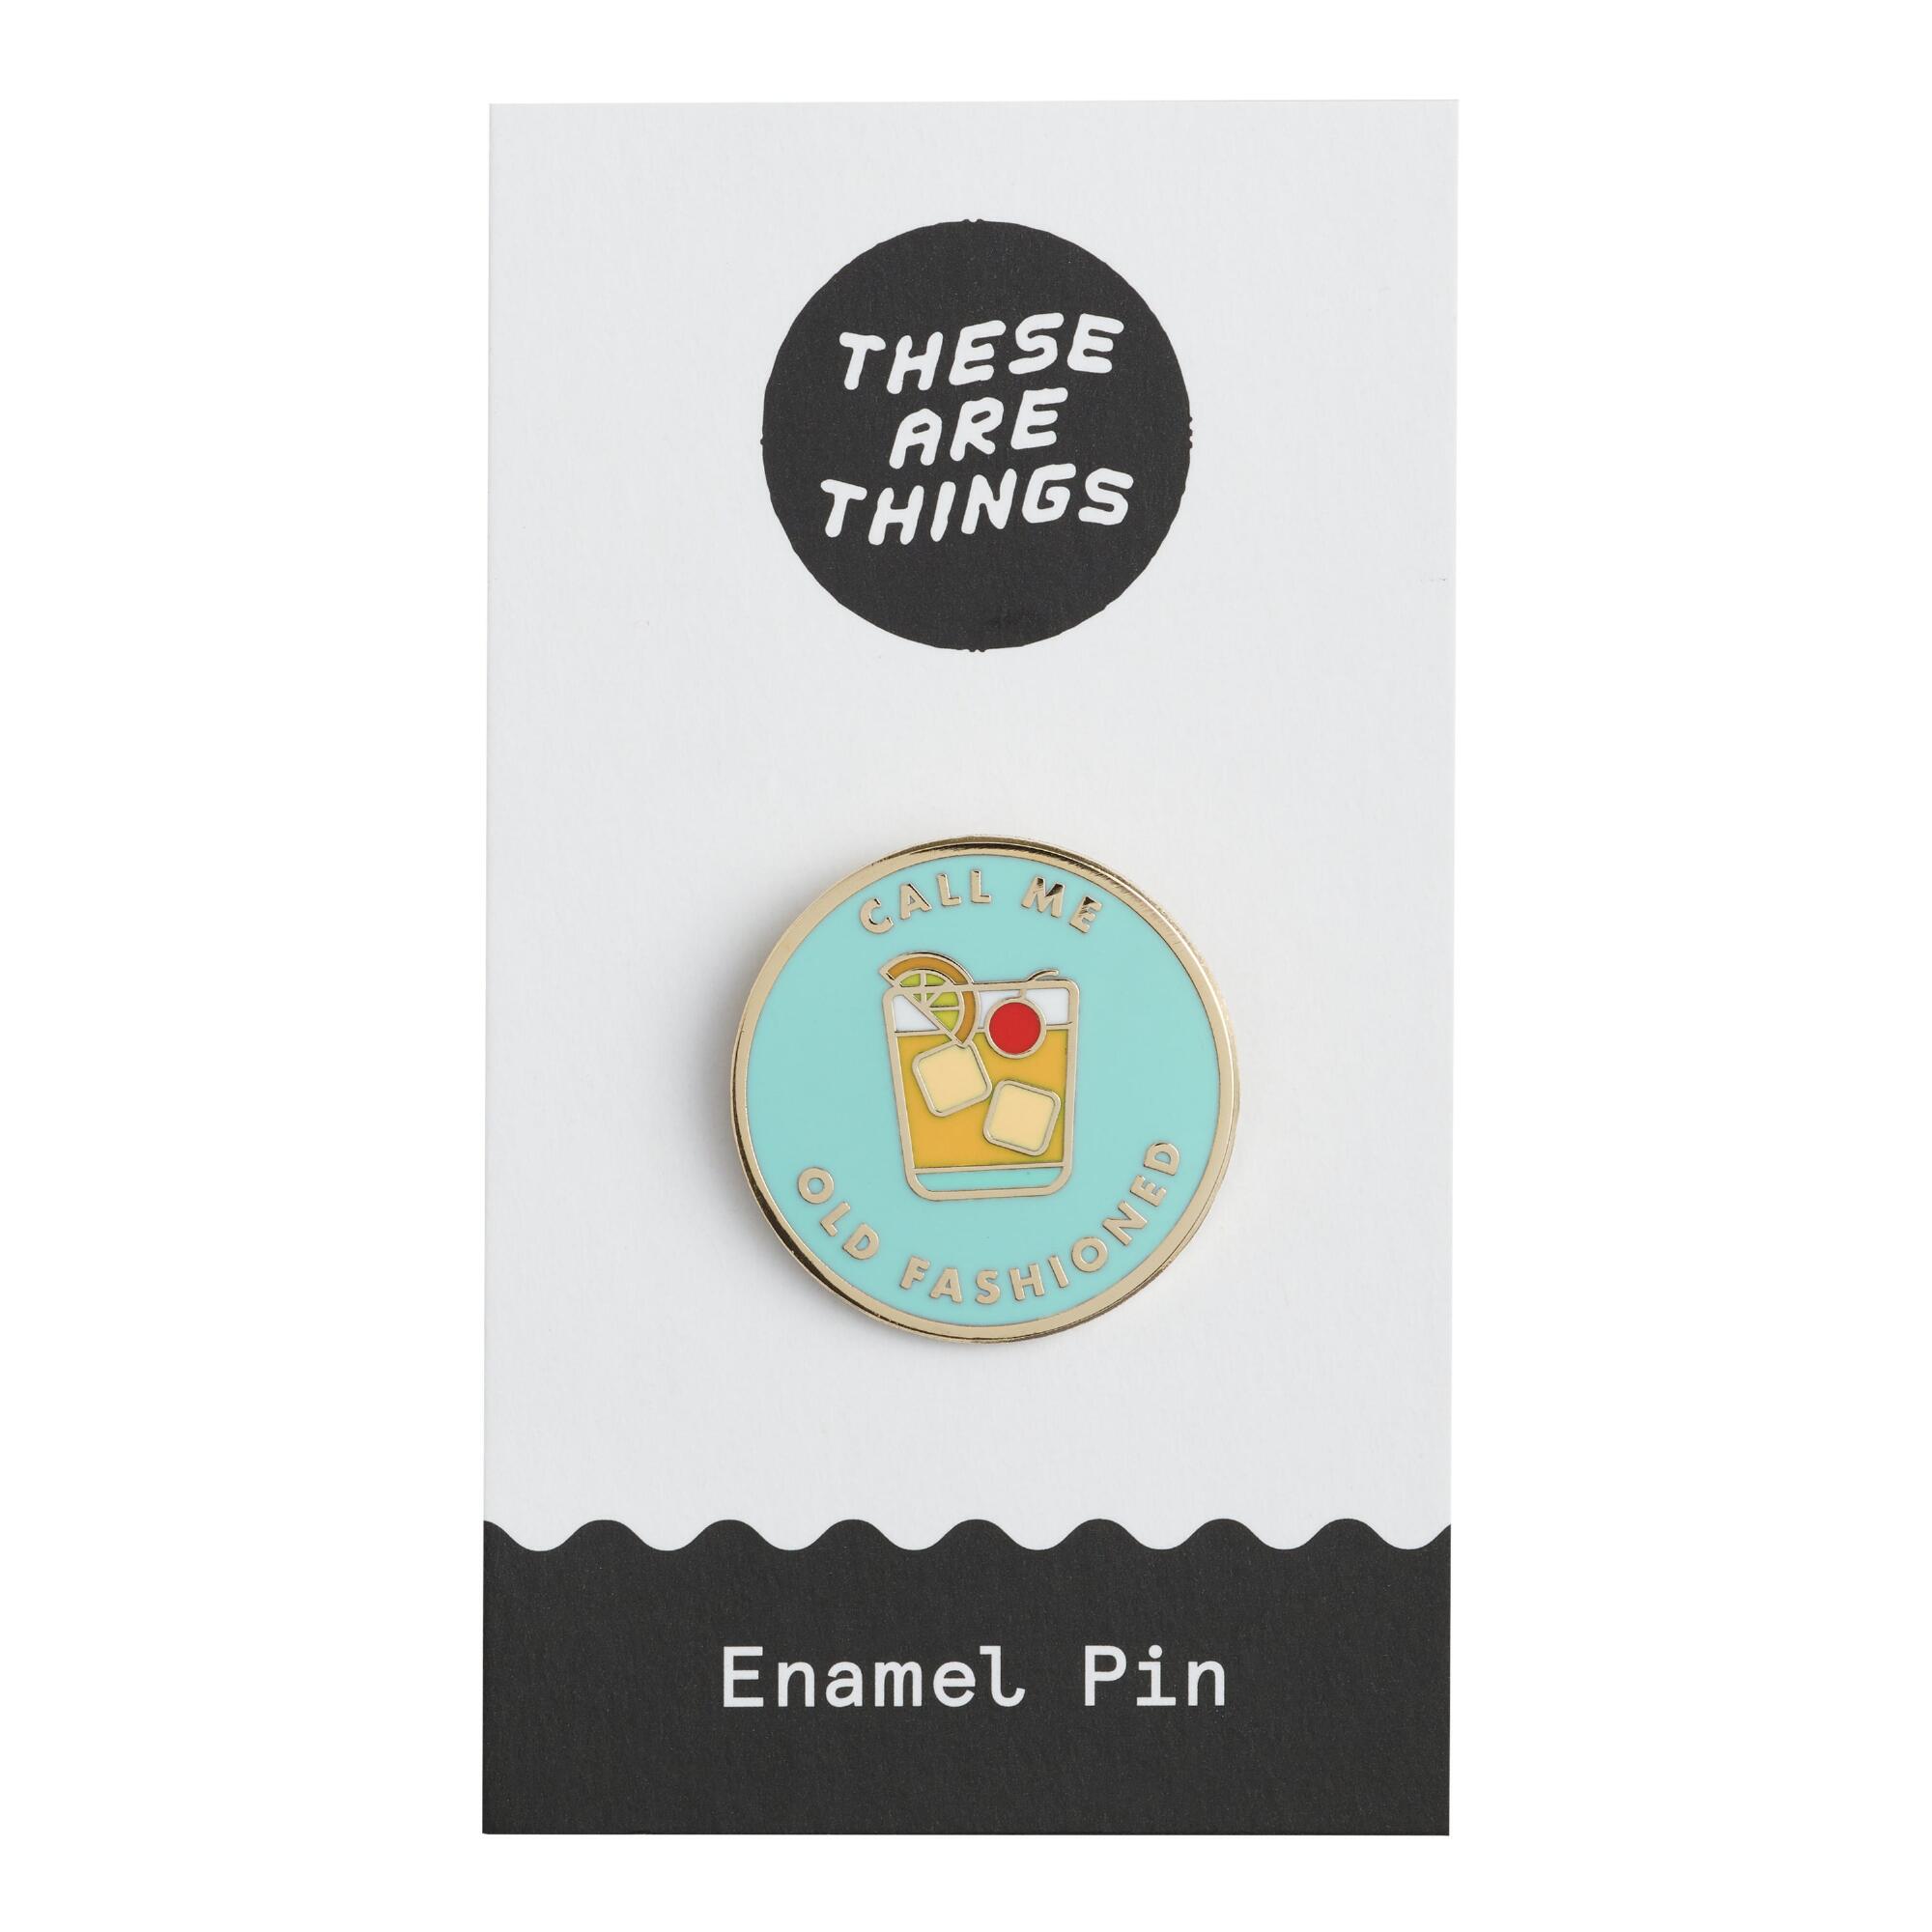 Call Me Old Fashioned Enamel Pin by World Market